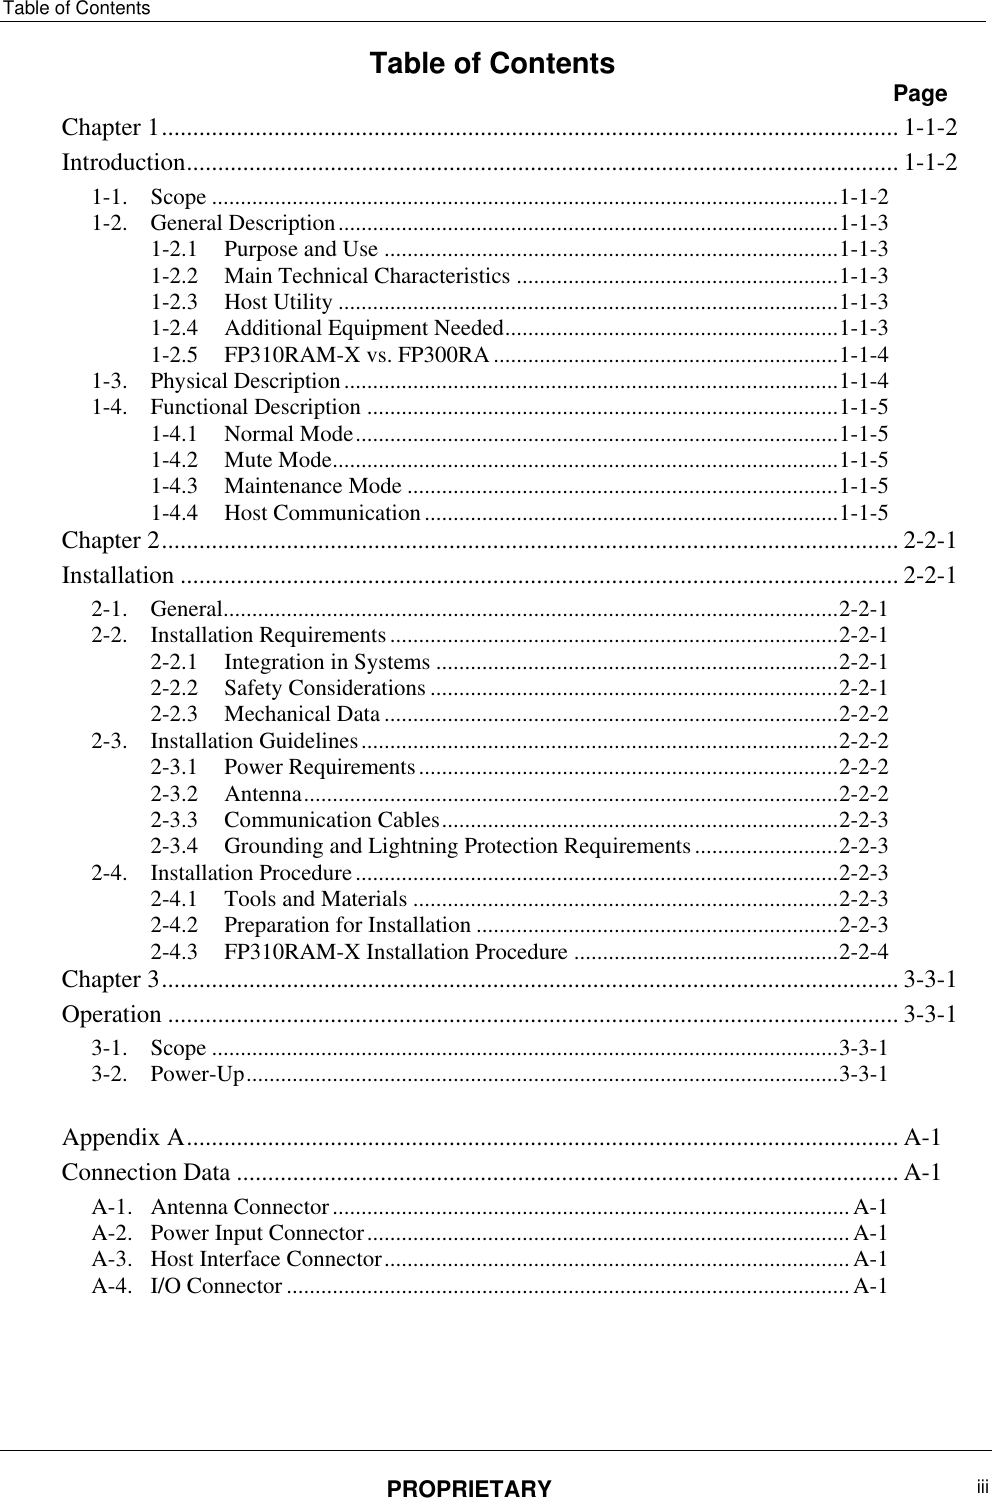 Table of Contents PROPRIETARY  iii   Table of Contents  Page Chapter ‎1 ...................................................................................................................... 1-1-2 Introduction .................................................................................................................. 1-1-2 1-1. Scope ............................................................................................................. 1-1-2 1-2. General Description ....................................................................................... 1-1-3 1-2.1 Purpose and Use ............................................................................... 1-1-3 1-2.2 Main Technical Characteristics ........................................................ 1-1-3 1-2.3 Host Utility ....................................................................................... 1-1-3 1-2.4 Additional Equipment Needed .......................................................... 1-1-3 1-2.5 FP310RAM-X vs. FP300RA ............................................................ 1-1-4 1-3. Physical Description ...................................................................................... 1-1-4 1-4. Functional Description .................................................................................. 1-1-5 1-4.1 Normal Mode .................................................................................... 1-1-5 1-4.2 Mute Mode ........................................................................................ 1-1-5 1-4.3 Maintenance Mode ........................................................................... 1-1-5 1-4.4 Host Communication ........................................................................ 1-1-5 Chapter ‎2 ...................................................................................................................... 2-2-1 Installation ................................................................................................................... 2-2-1 2-1. General........................................................................................................... 2-2-1 2-2. Installation Requirements .............................................................................. 2-2-1 2-2.1 Integration in Systems ...................................................................... 2-2-1 2-2.2 Safety Considerations ....................................................................... 2-2-1 2-2.3 Mechanical Data ............................................................................... 2-2-2 2-3. Installation Guidelines ................................................................................... 2-2-2 2-3.1 Power Requirements ......................................................................... 2-2-2 2-3.2 Antenna ............................................................................................. 2-2-2 2-3.3 Communication Cables ..................................................................... 2-2-3 2-3.4 Grounding and Lightning Protection Requirements ......................... 2-2-3 2-4. Installation Procedure .................................................................................... 2-2-3 2-4.1 Tools and Materials .......................................................................... 2-2-3 2-4.2 Preparation for Installation ............................................................... 2-2-3 2-4.3 FP310RAM-X Installation Procedure .............................................. 2-2-4 Chapter ‎3 ...................................................................................................................... 3-3-1 Operation ..................................................................................................................... 3-3-1 3-1. Scope ............................................................................................................. 3-3-1 3-2. Power-Up ....................................................................................................... 3-3-1  Appendix ‎A .................................................................................................................. A-1 Connection Data .......................................................................................................... A-1 A-1. Antenna Connector .......................................................................................... A-1 A-2. Power Input Connector .................................................................................... A-1 A-3. Host Interface Connector ................................................................................. A-1 A-4. I/O Connector .................................................................................................. A-1     